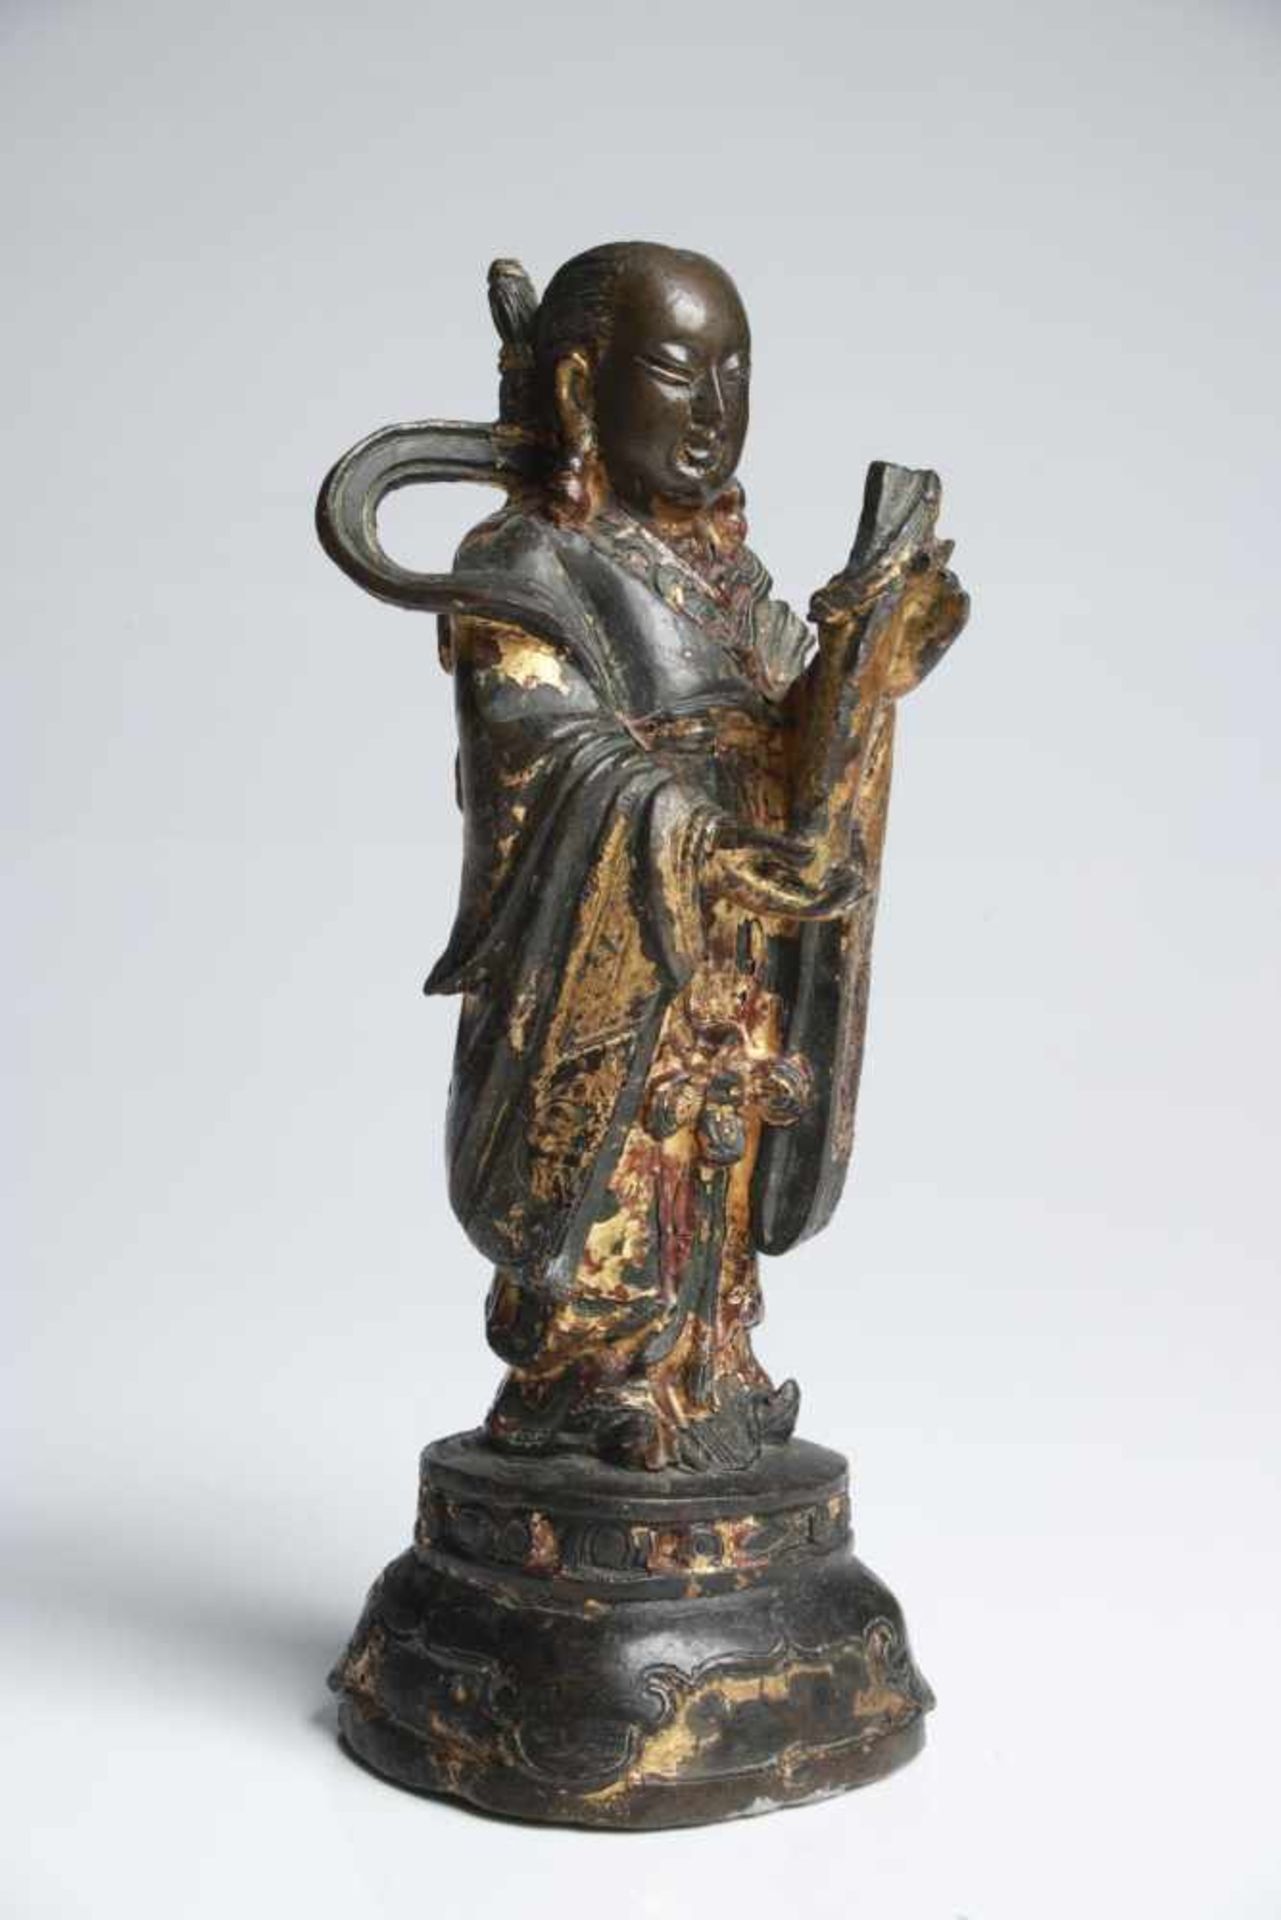 SCHOLARbronze with traces of Lacquer and goldChina, 16th centuryH: 23 cm - Bild 2 aus 3